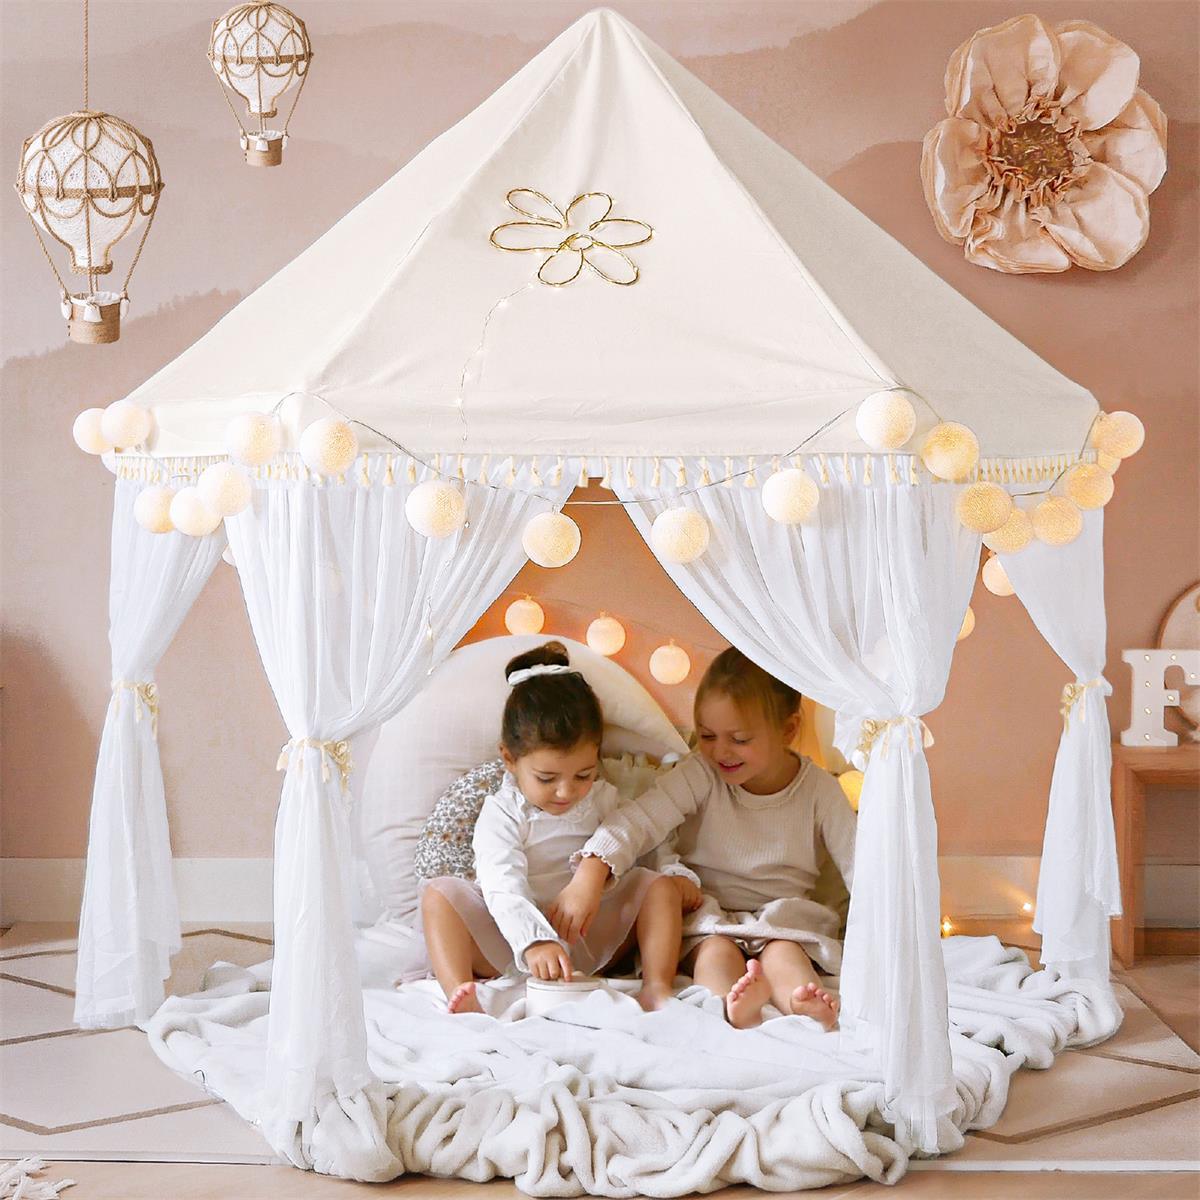 http://www.thecarpentryshopco.com/cdn/shop/files/play-tents-tunnels-tiny-land-large-playhouse-play-tent-for-kids-39948005605602.jpg?v=1701432814